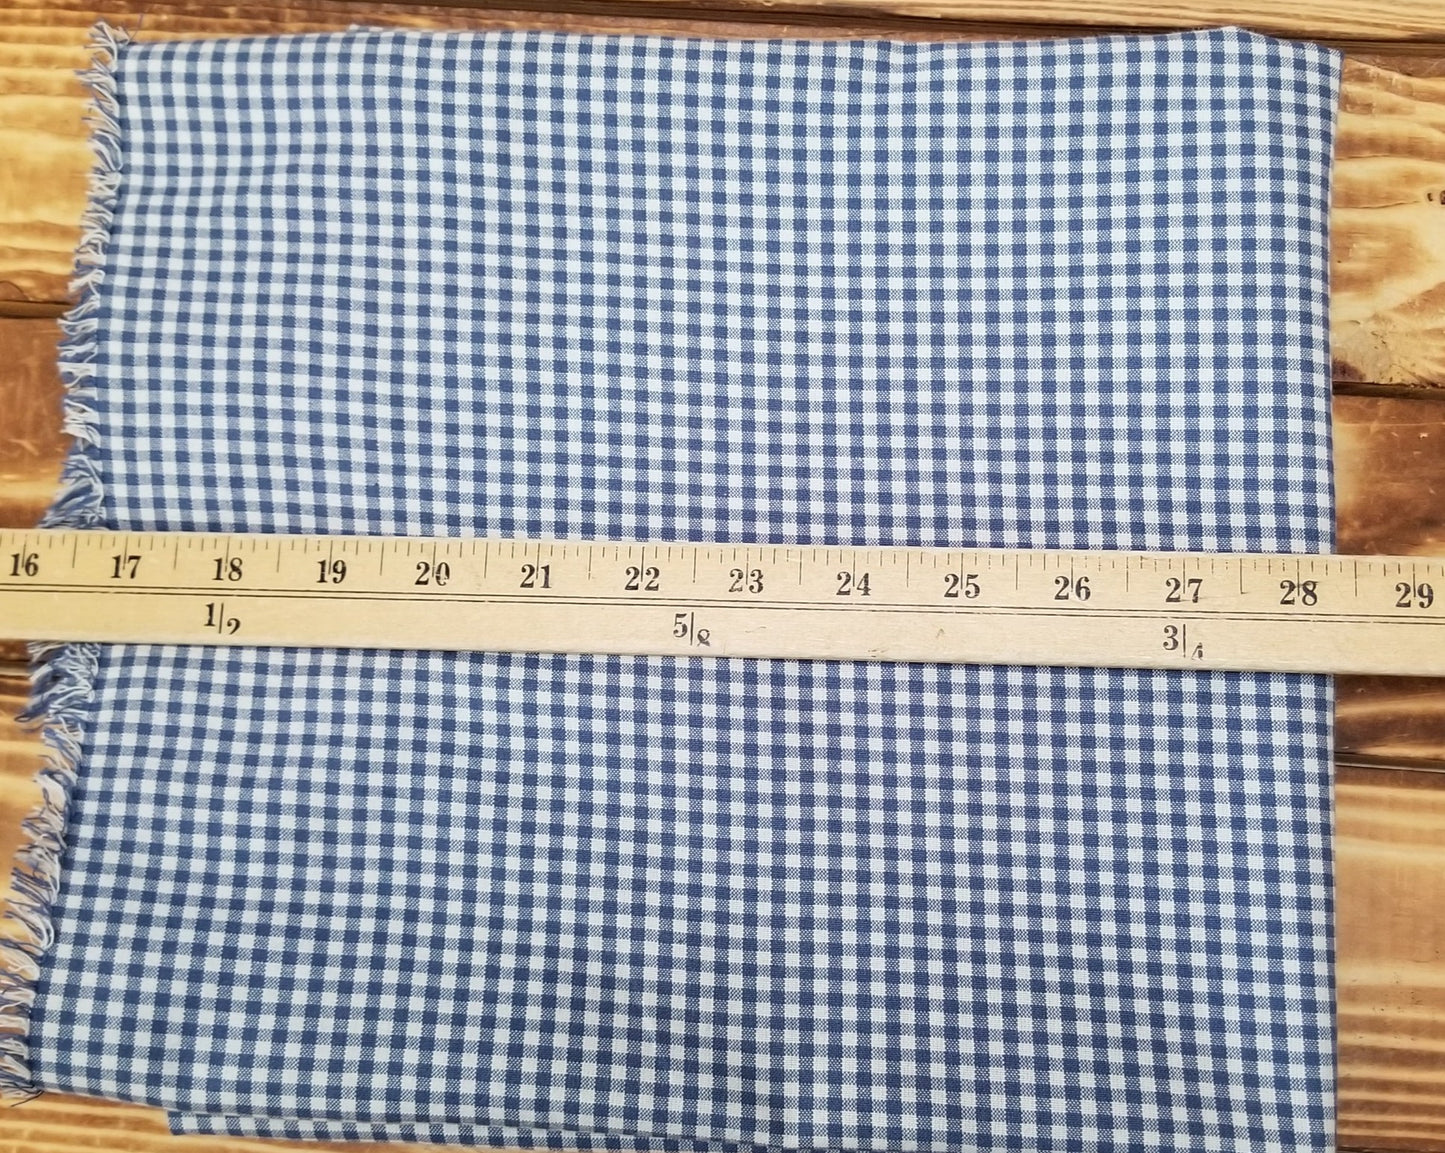 Kaufman Yarn Dyed Cotton Linen Micro Gingham Denim Woven-by the yard